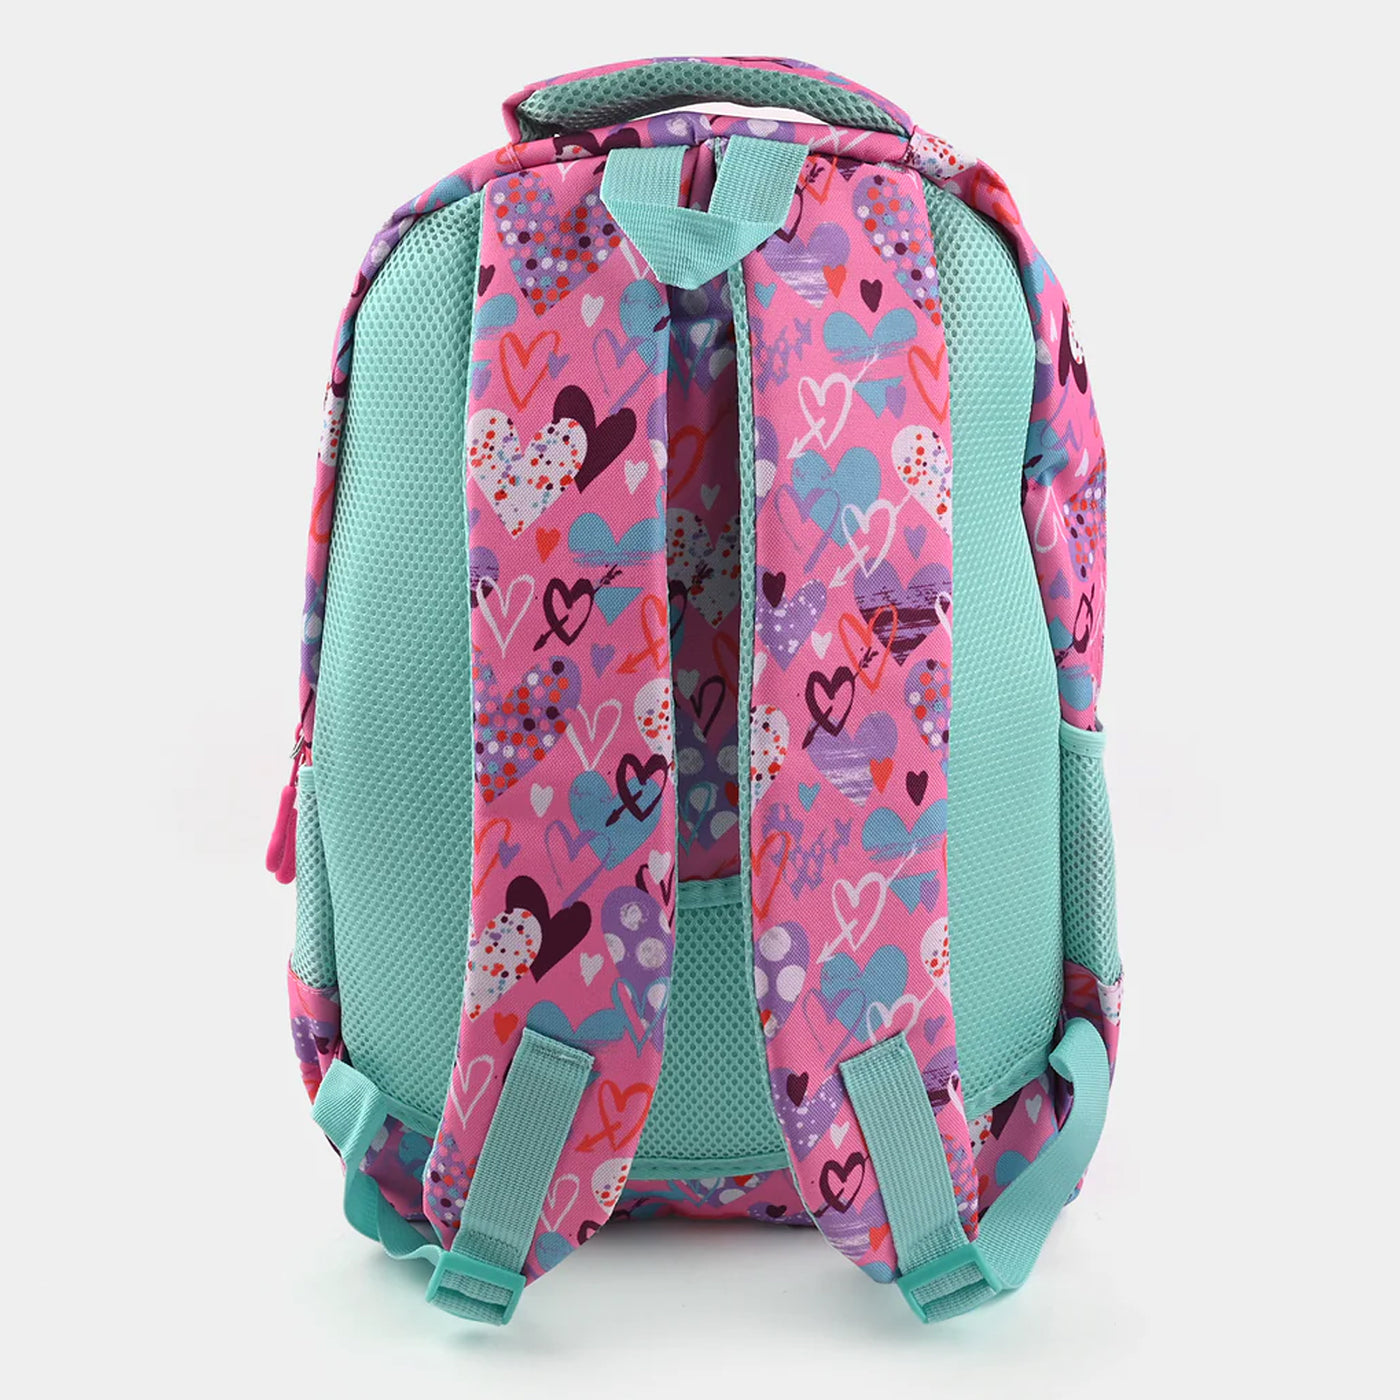 Stylish School Backpack For Kids